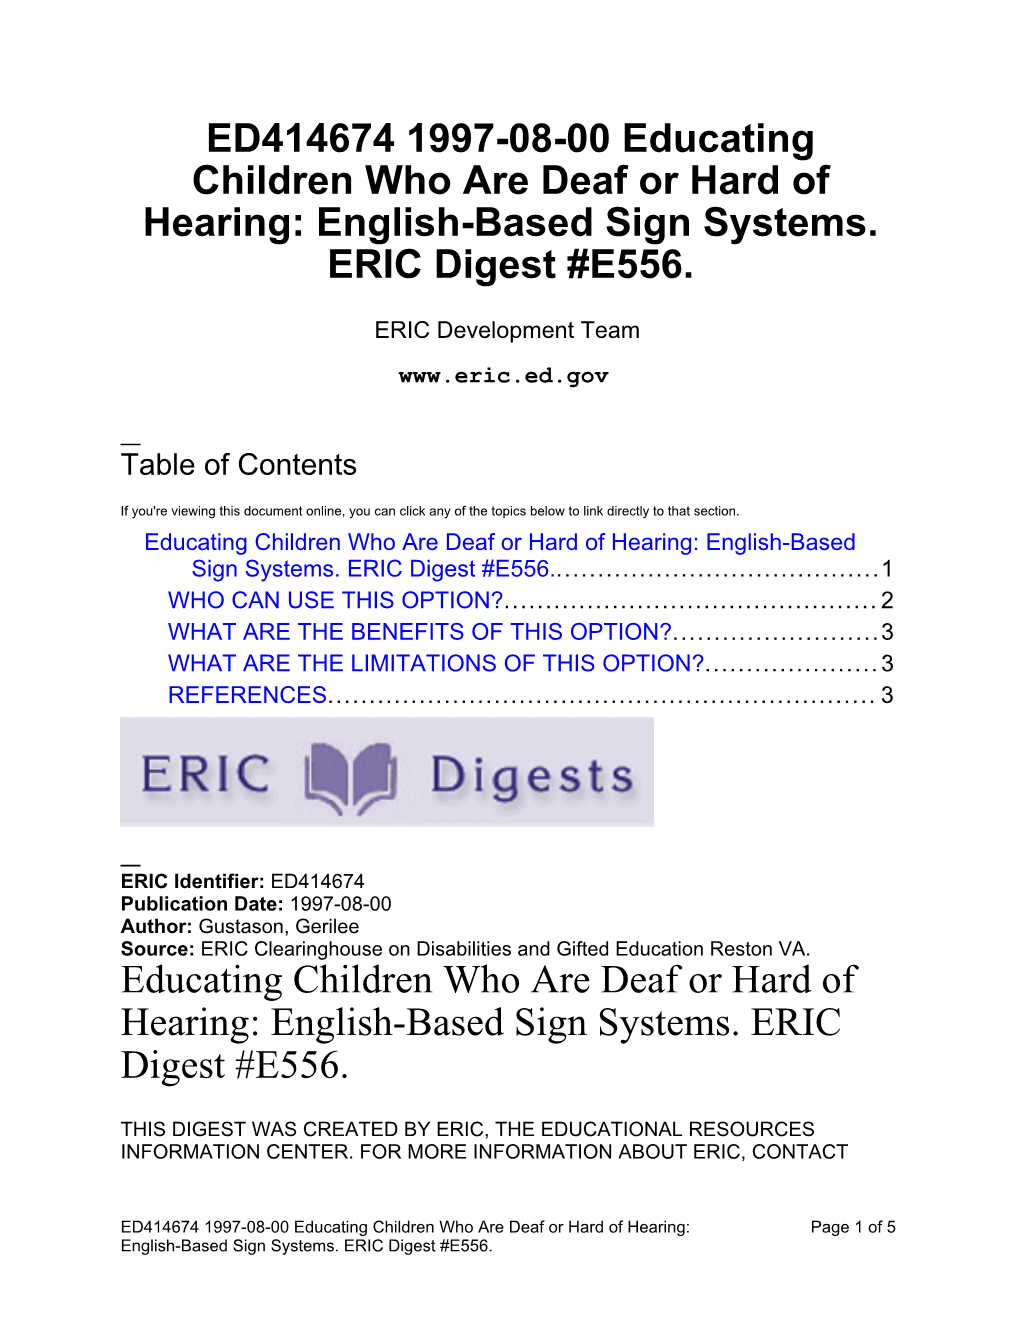 ED414674 1997-08-00 Educating Children Who Are Deaf Or Hard of Hearing: English-Based Sign Systems